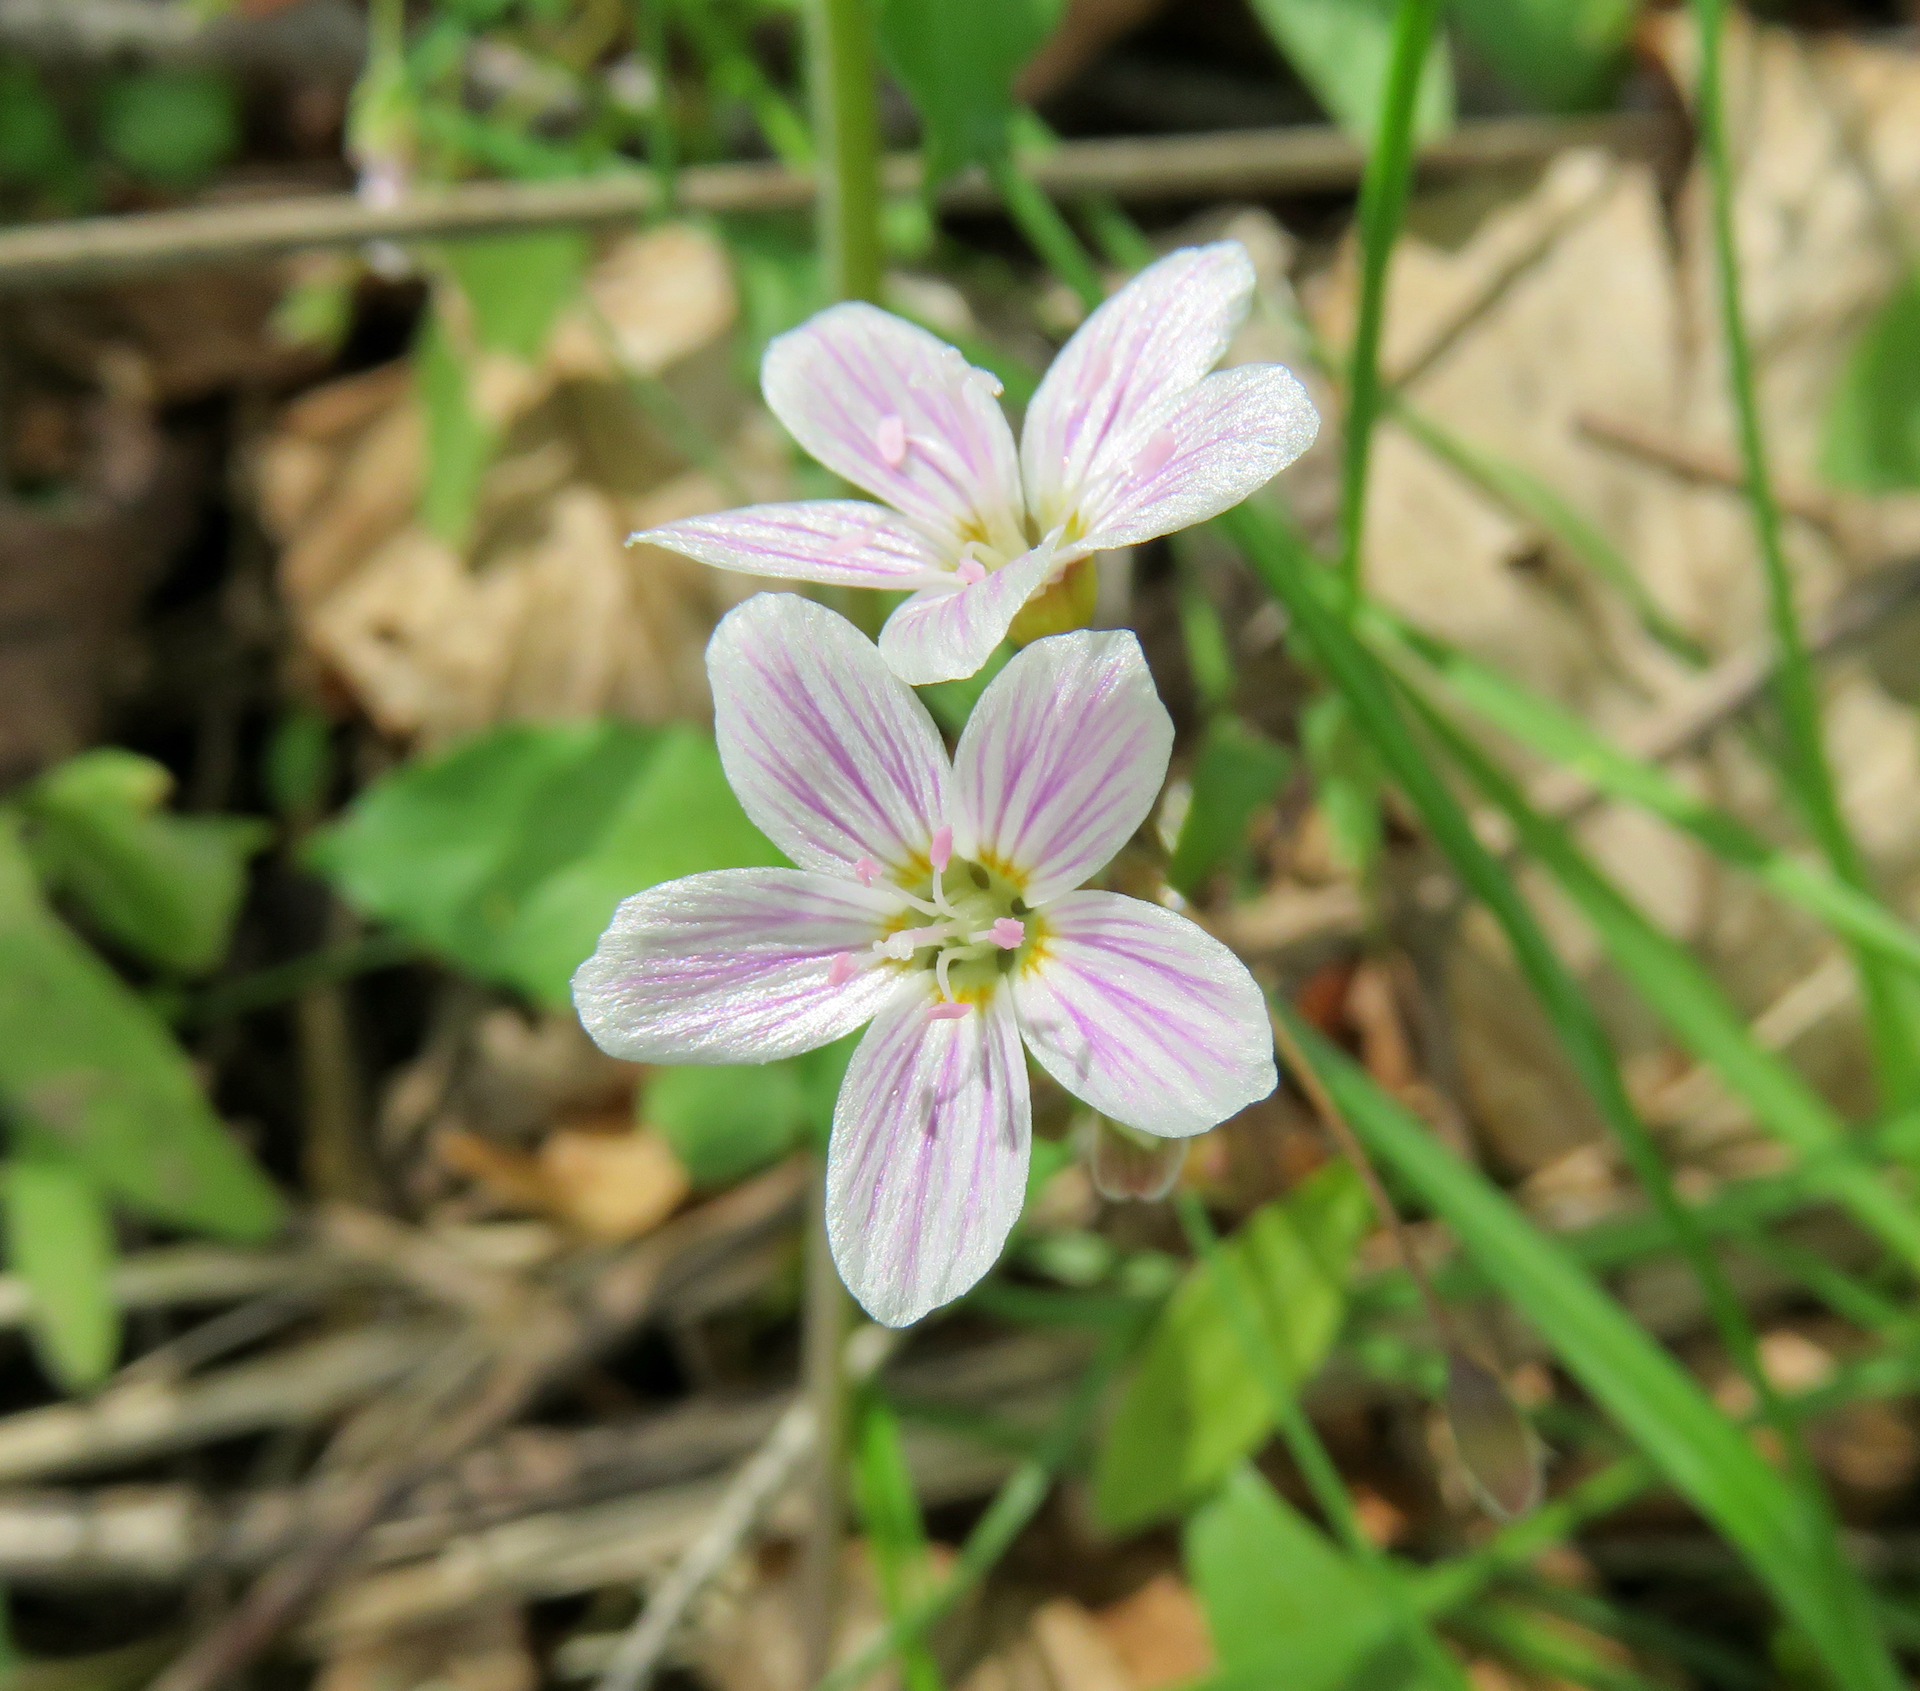 The Scientific Name is Claytonia caroliniana. You will likely hear them called Carolina Spring-beauty. This picture shows the White to pink flowers with darker pink stripes and elliptical leaves of Claytonia caroliniana